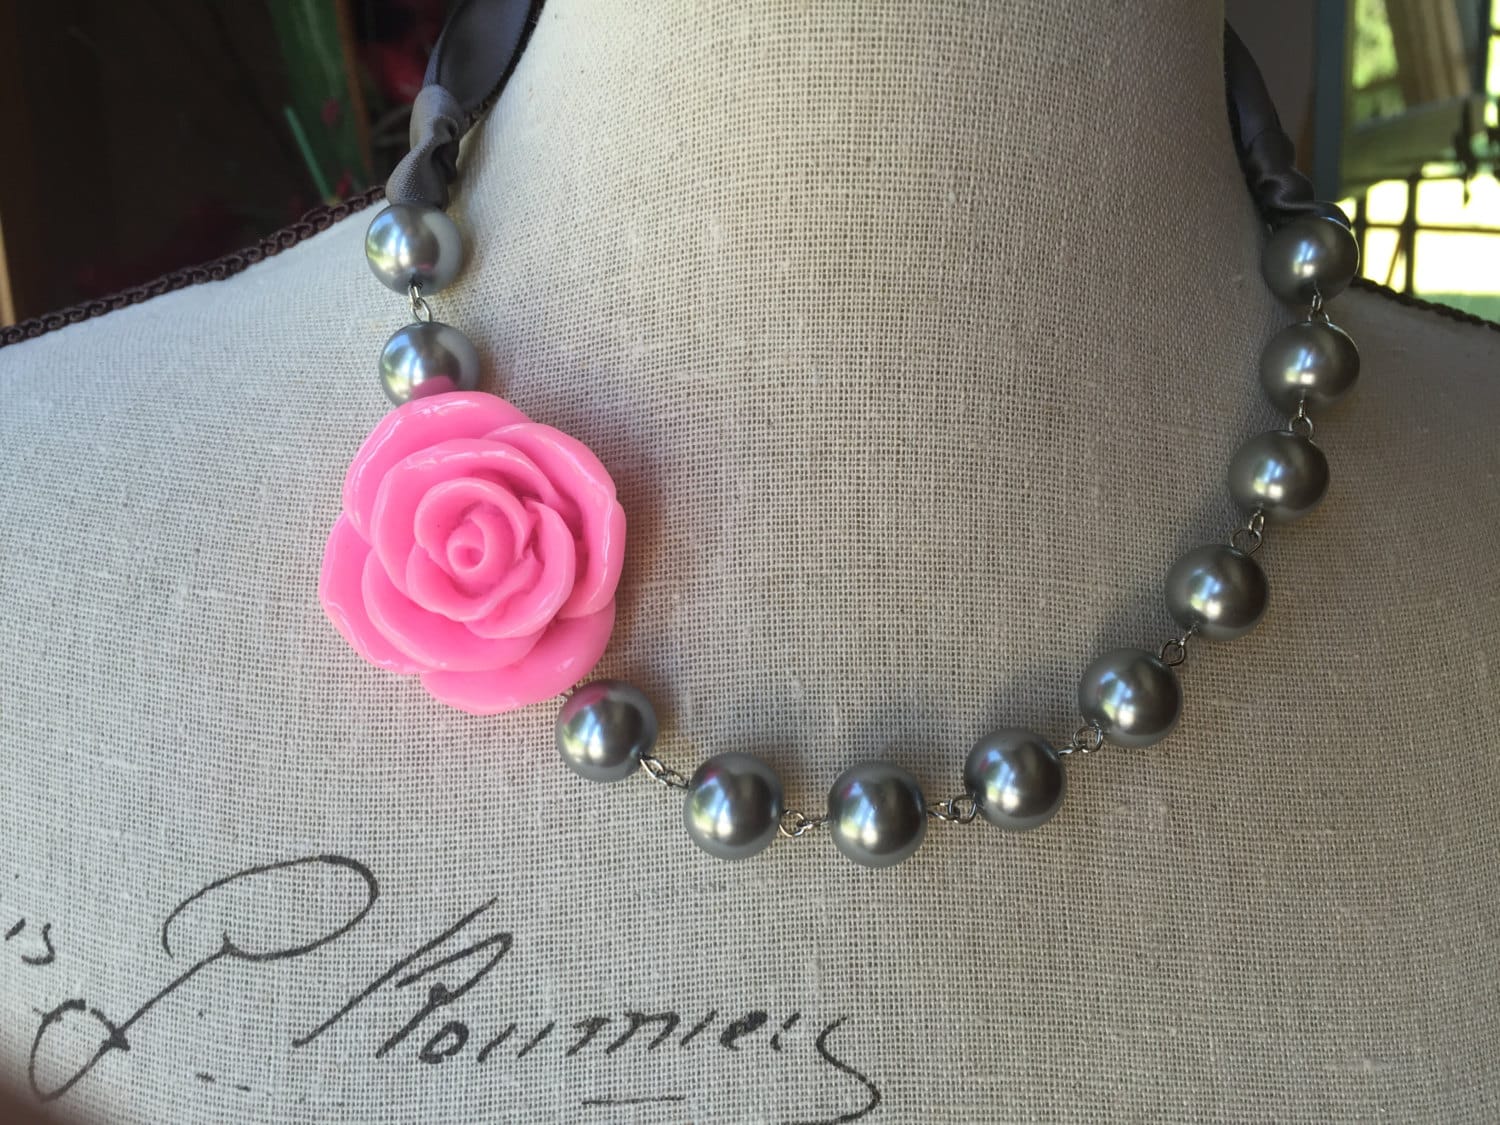 Pink flower and pewter pearls together in this Pearl necklace